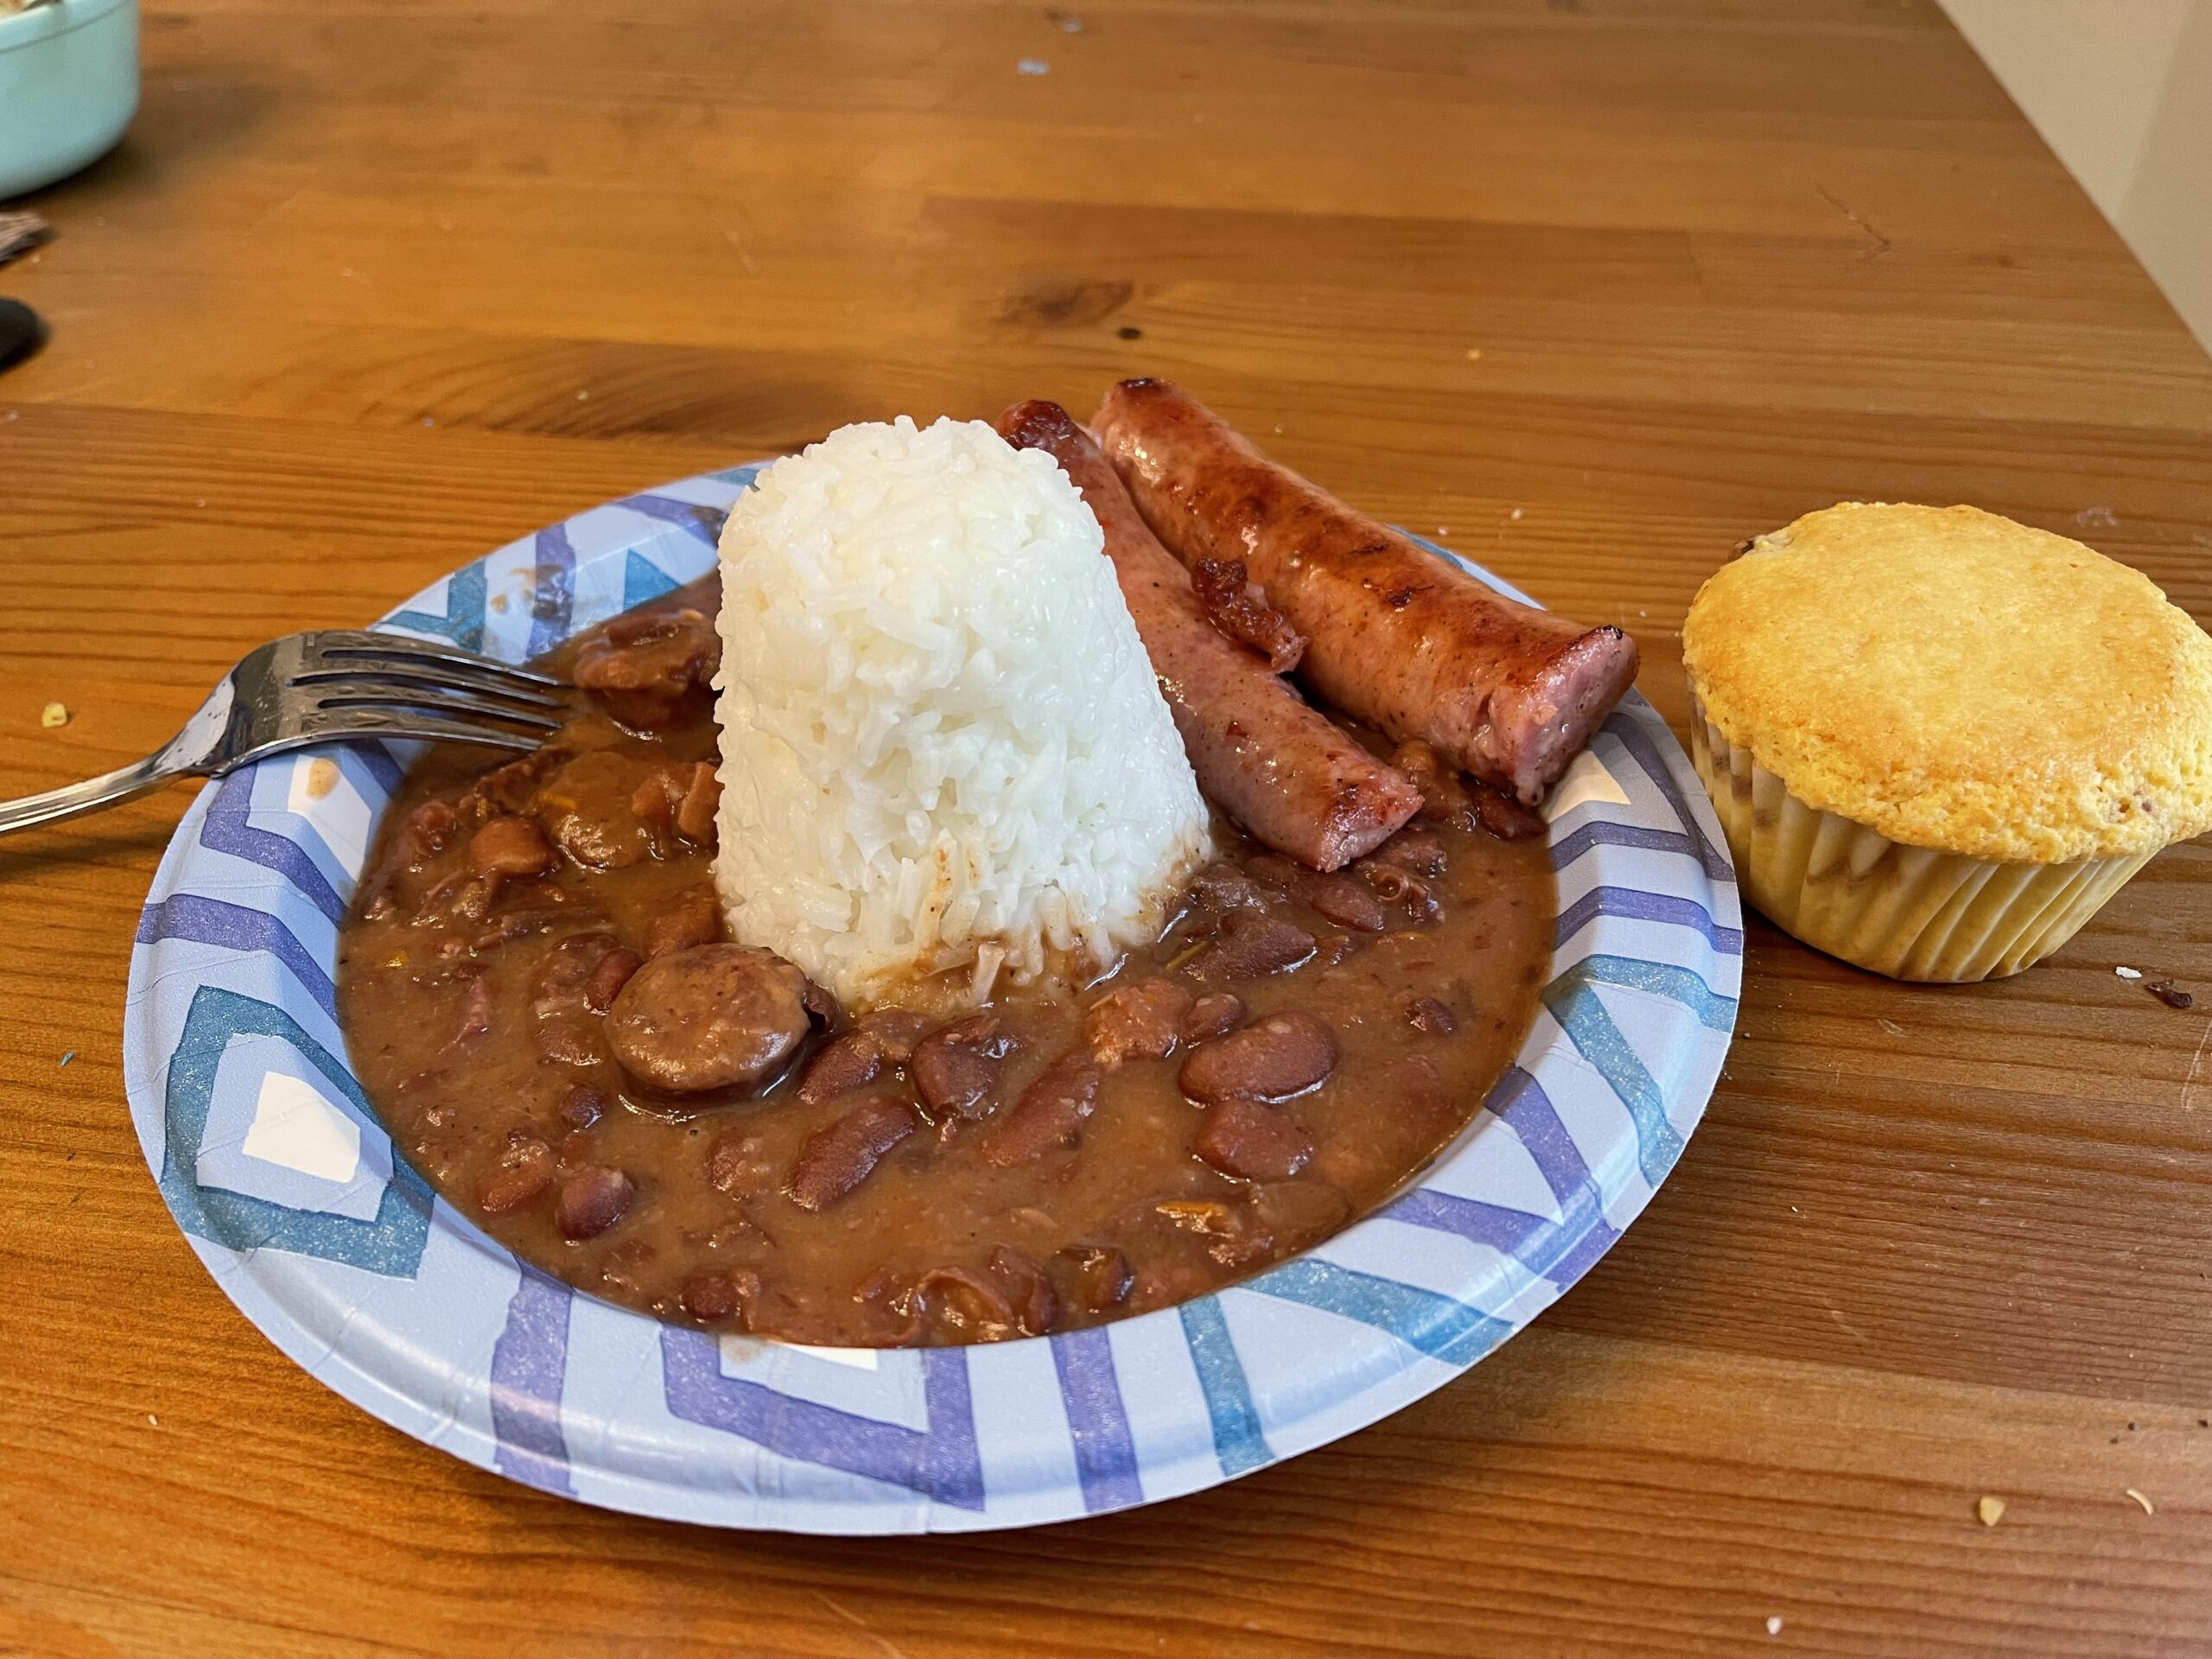 Red beans and rice, cornbread and smoked sausage on a paper plate